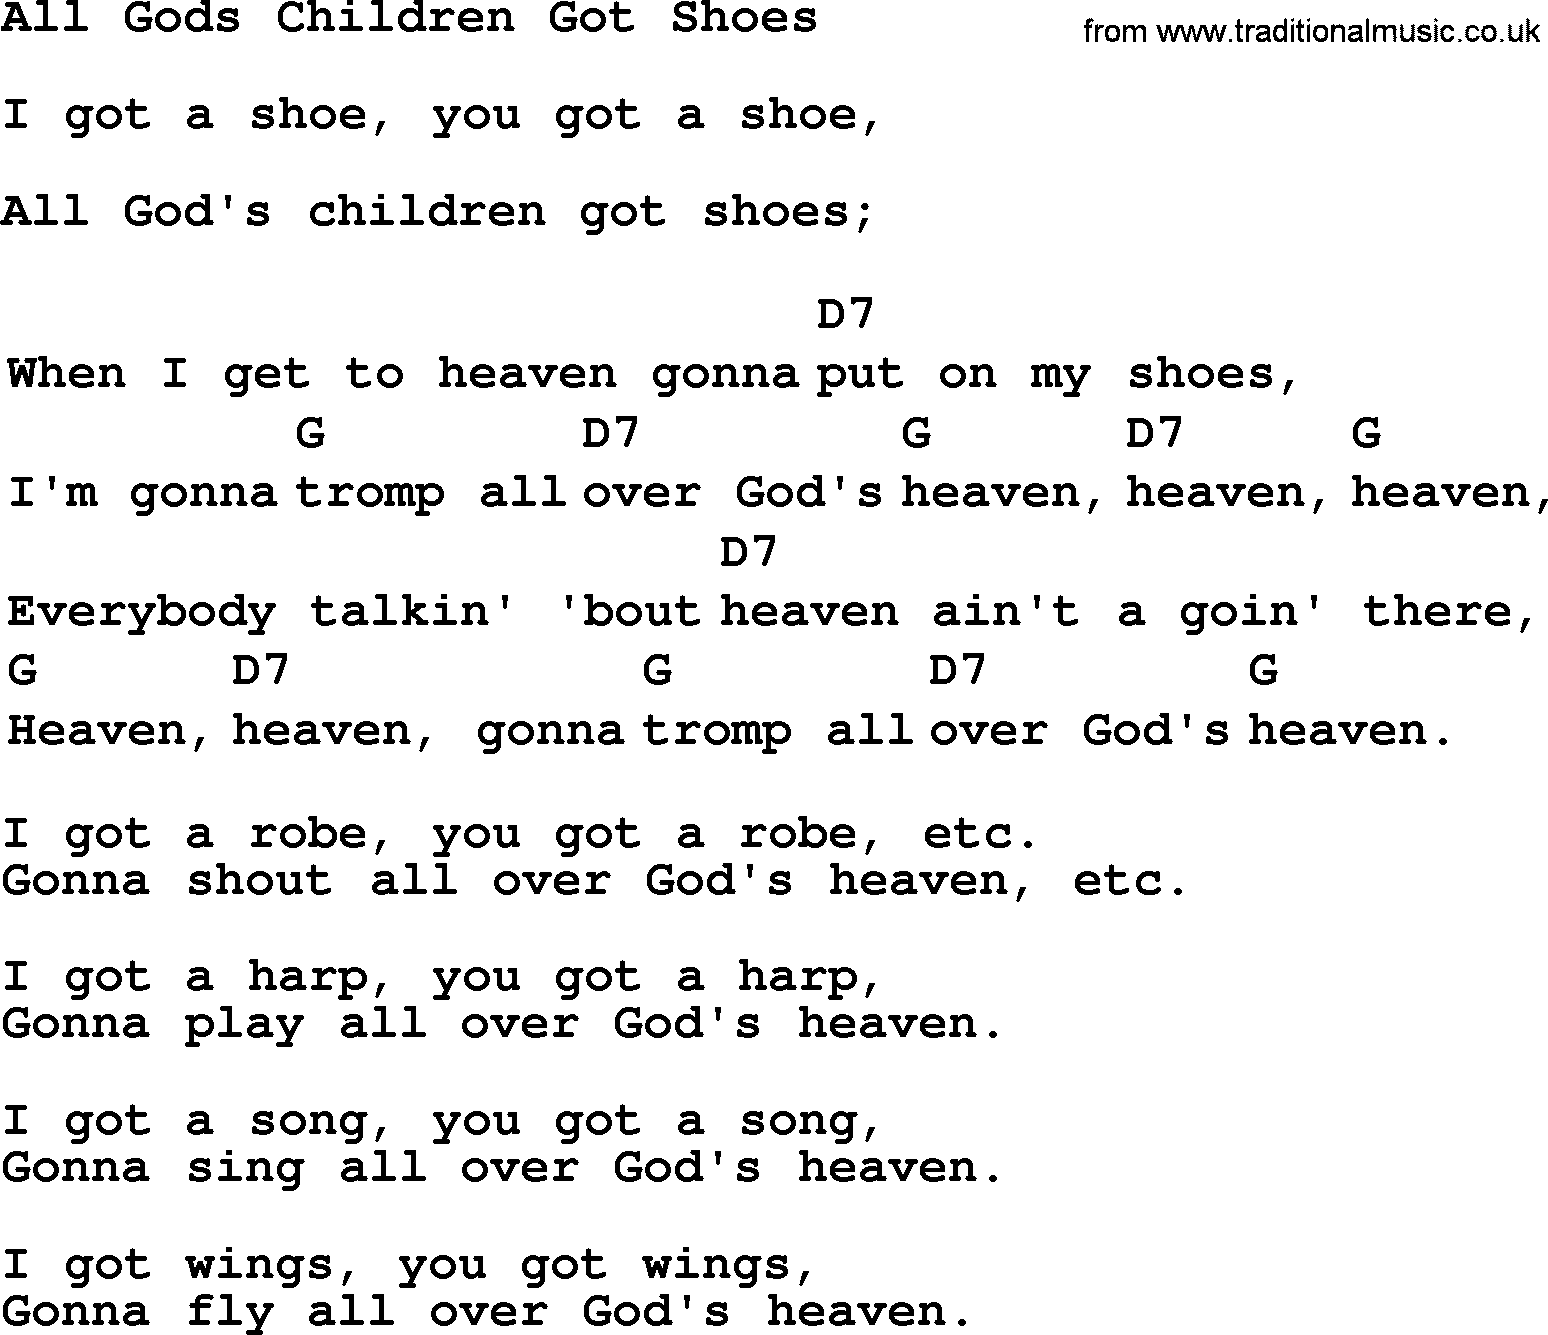 Top 1000 Most Popular Folk and Old-time Songs: All Gods Children Got Shoes, lyrics and chords